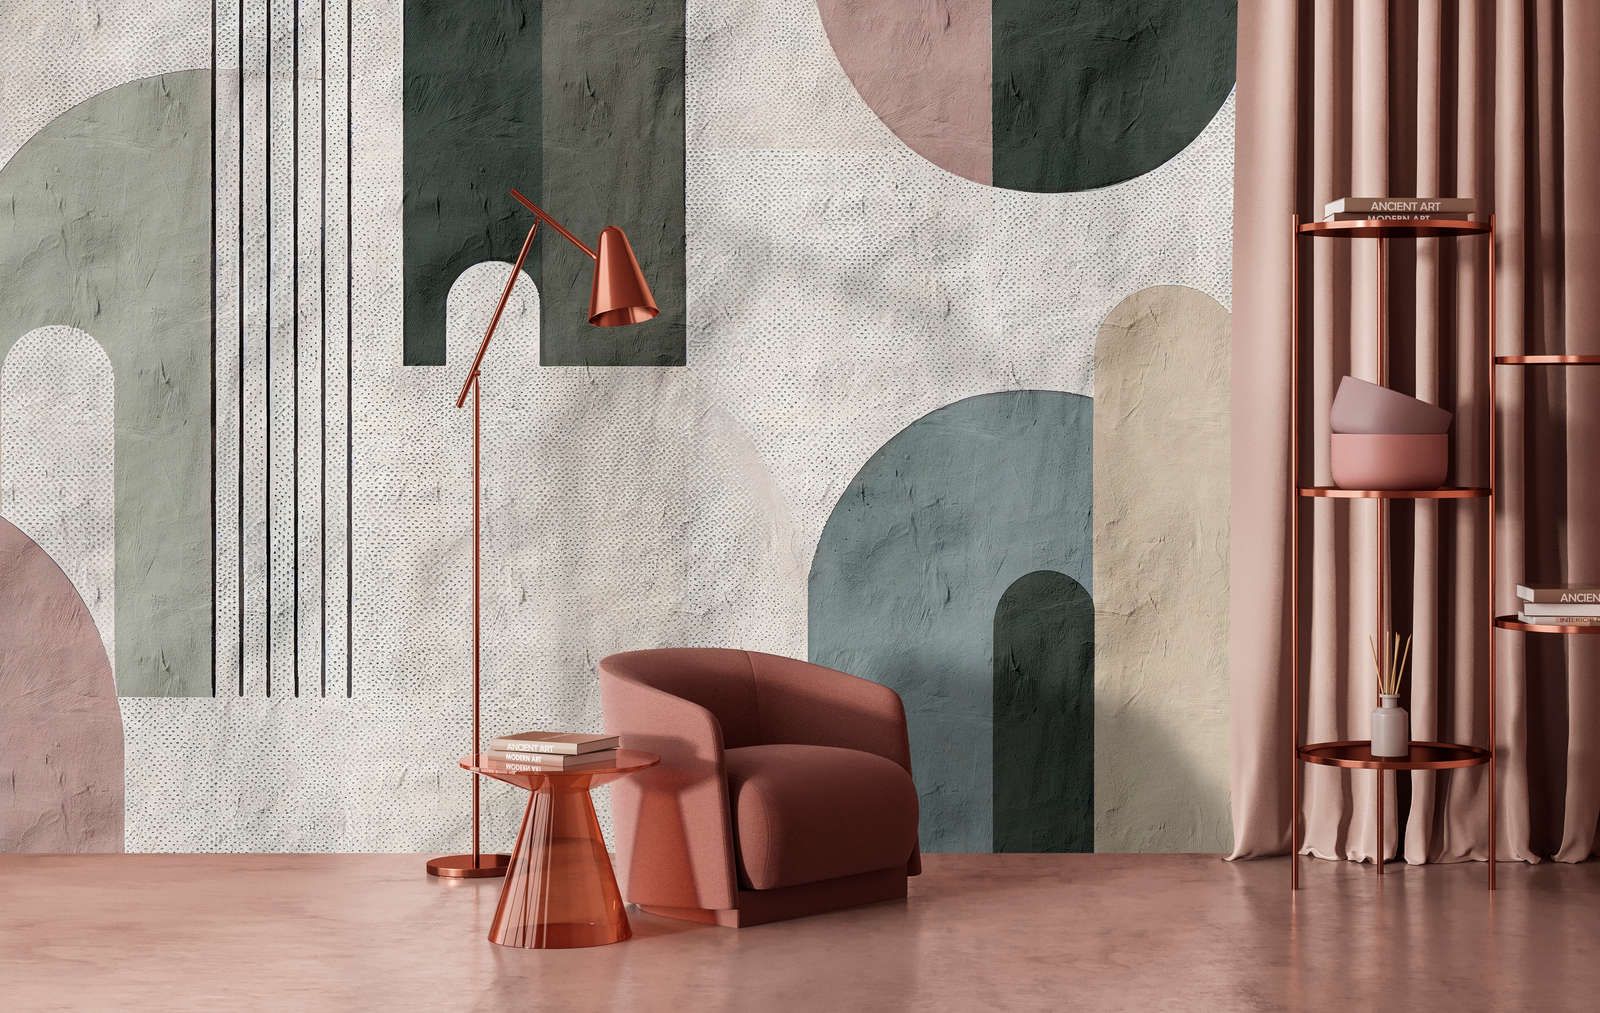             Photo wallpaper »torenta« - Graphic pattern with round arch, clay plaster texture - Smooth, slightly pearly shimmering non-woven fabric
        